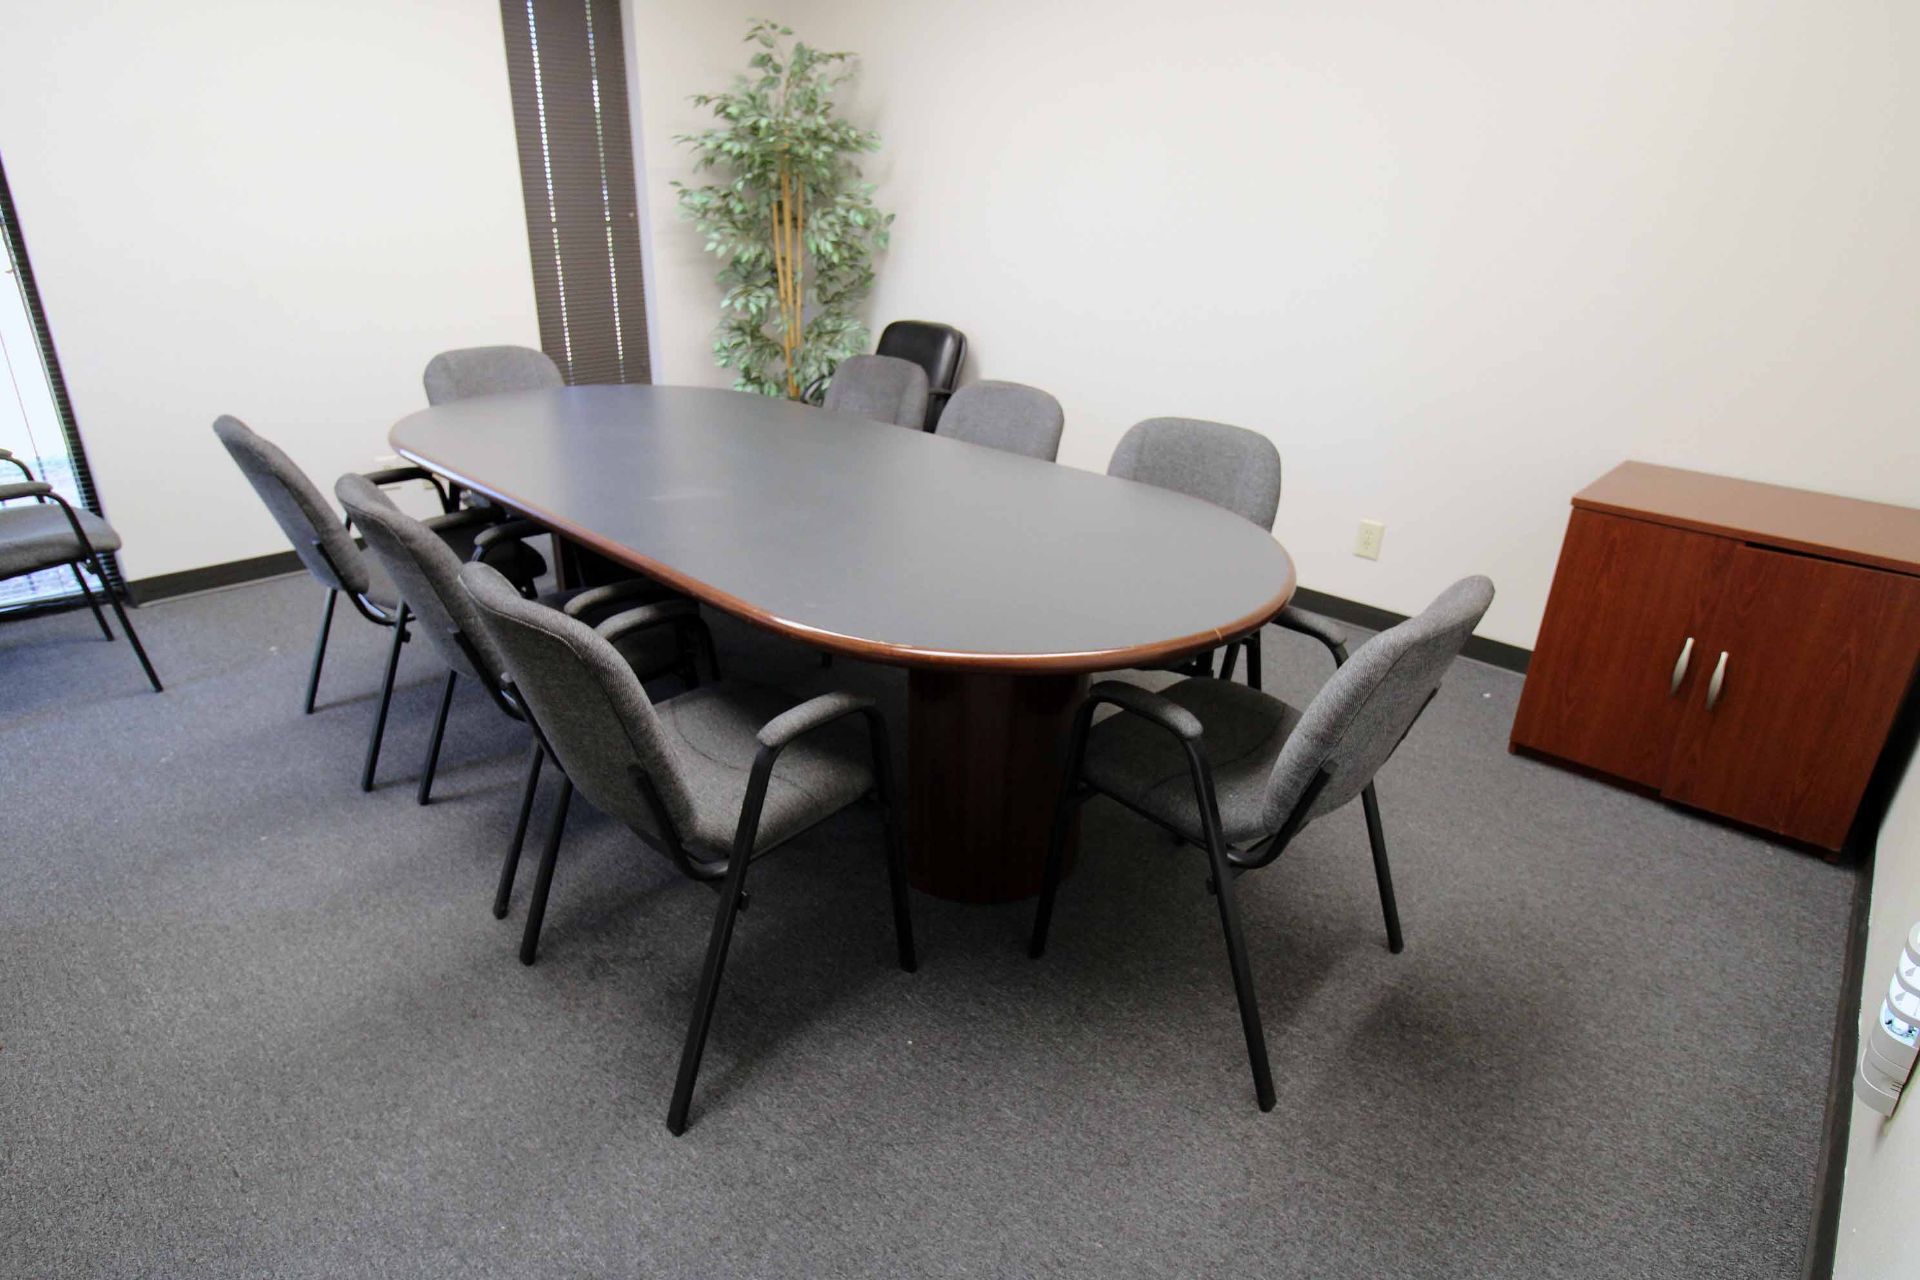 CONFERENCE TABLE & CHAIRS, 48" x 108" (Located at: Emco Wheaton USA, Inc., 9111 Jackrabbit road,